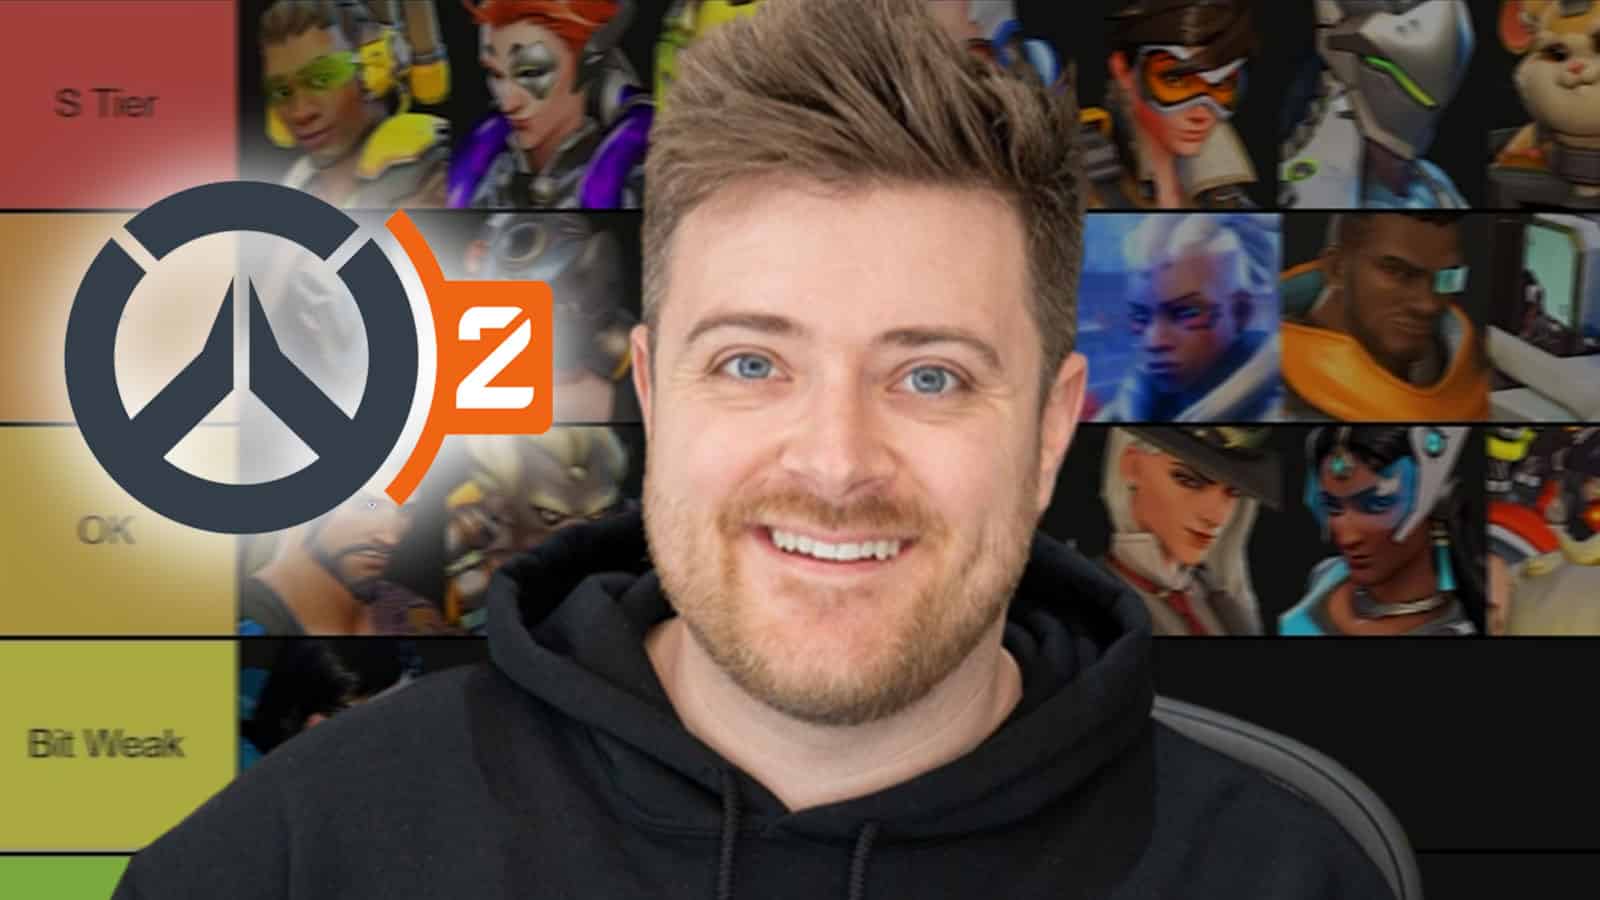 Overwatch content creator Stylosa with his tier list